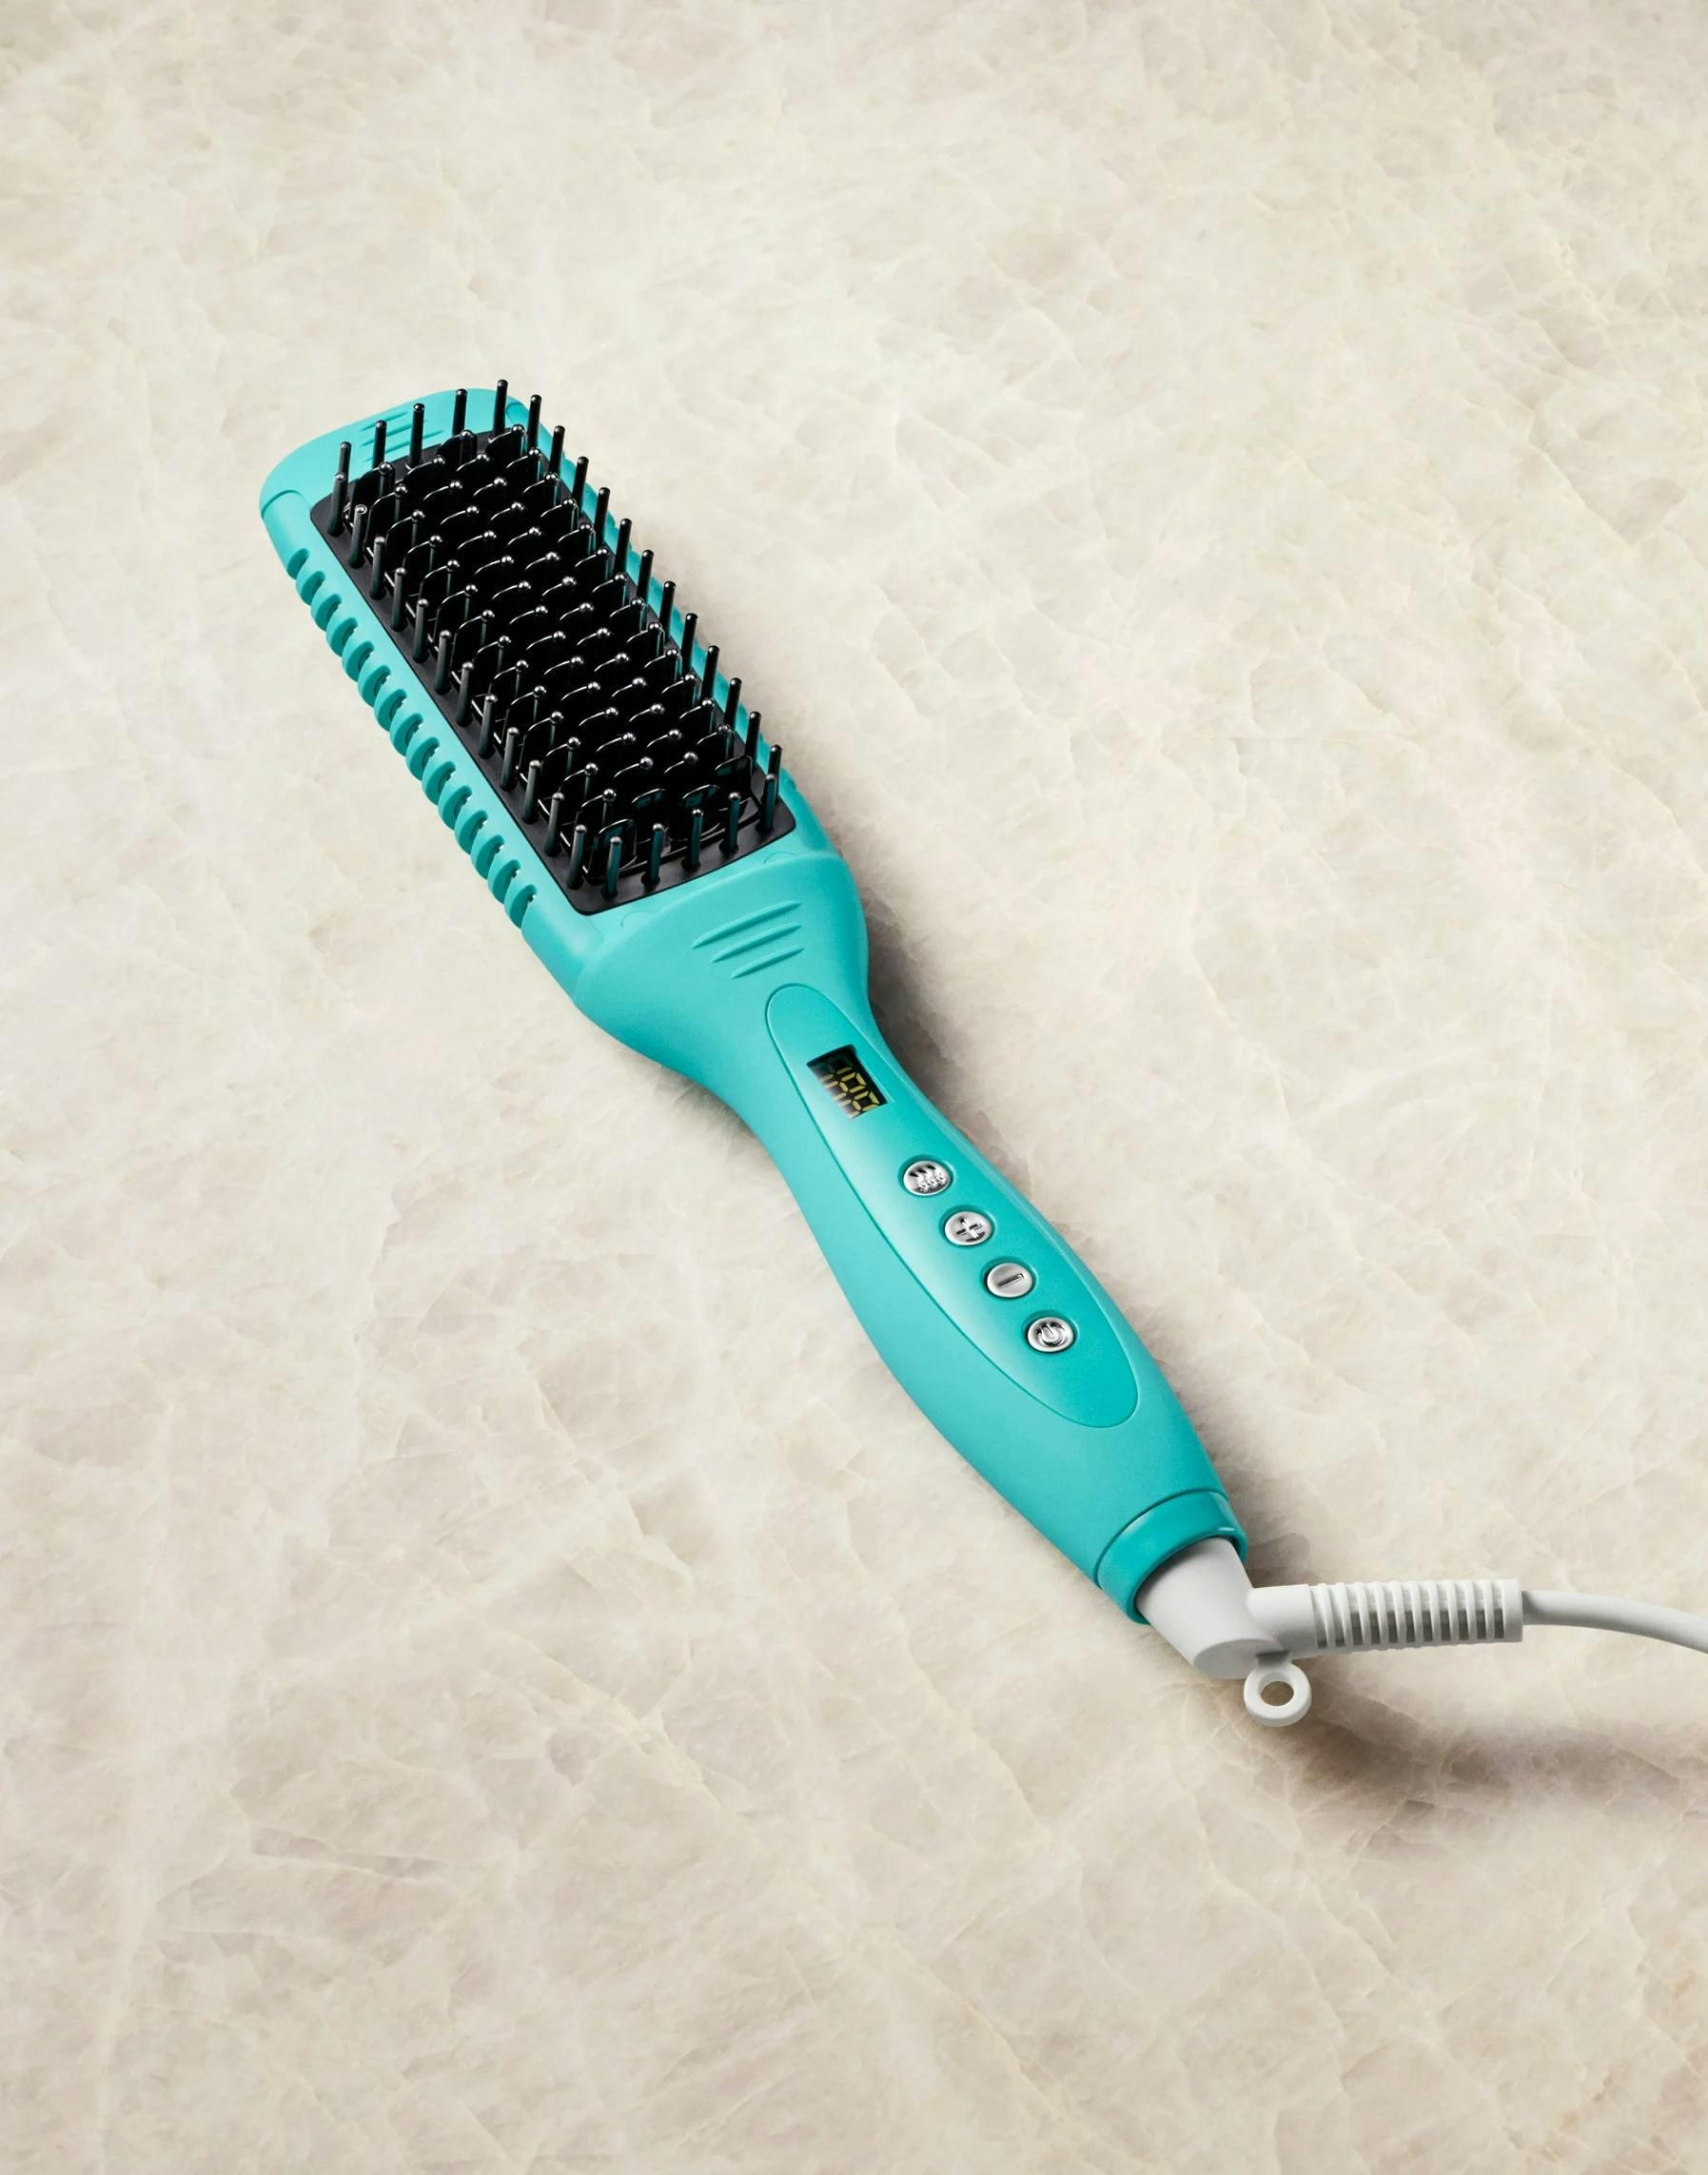 Moroccanoil Styling Tools